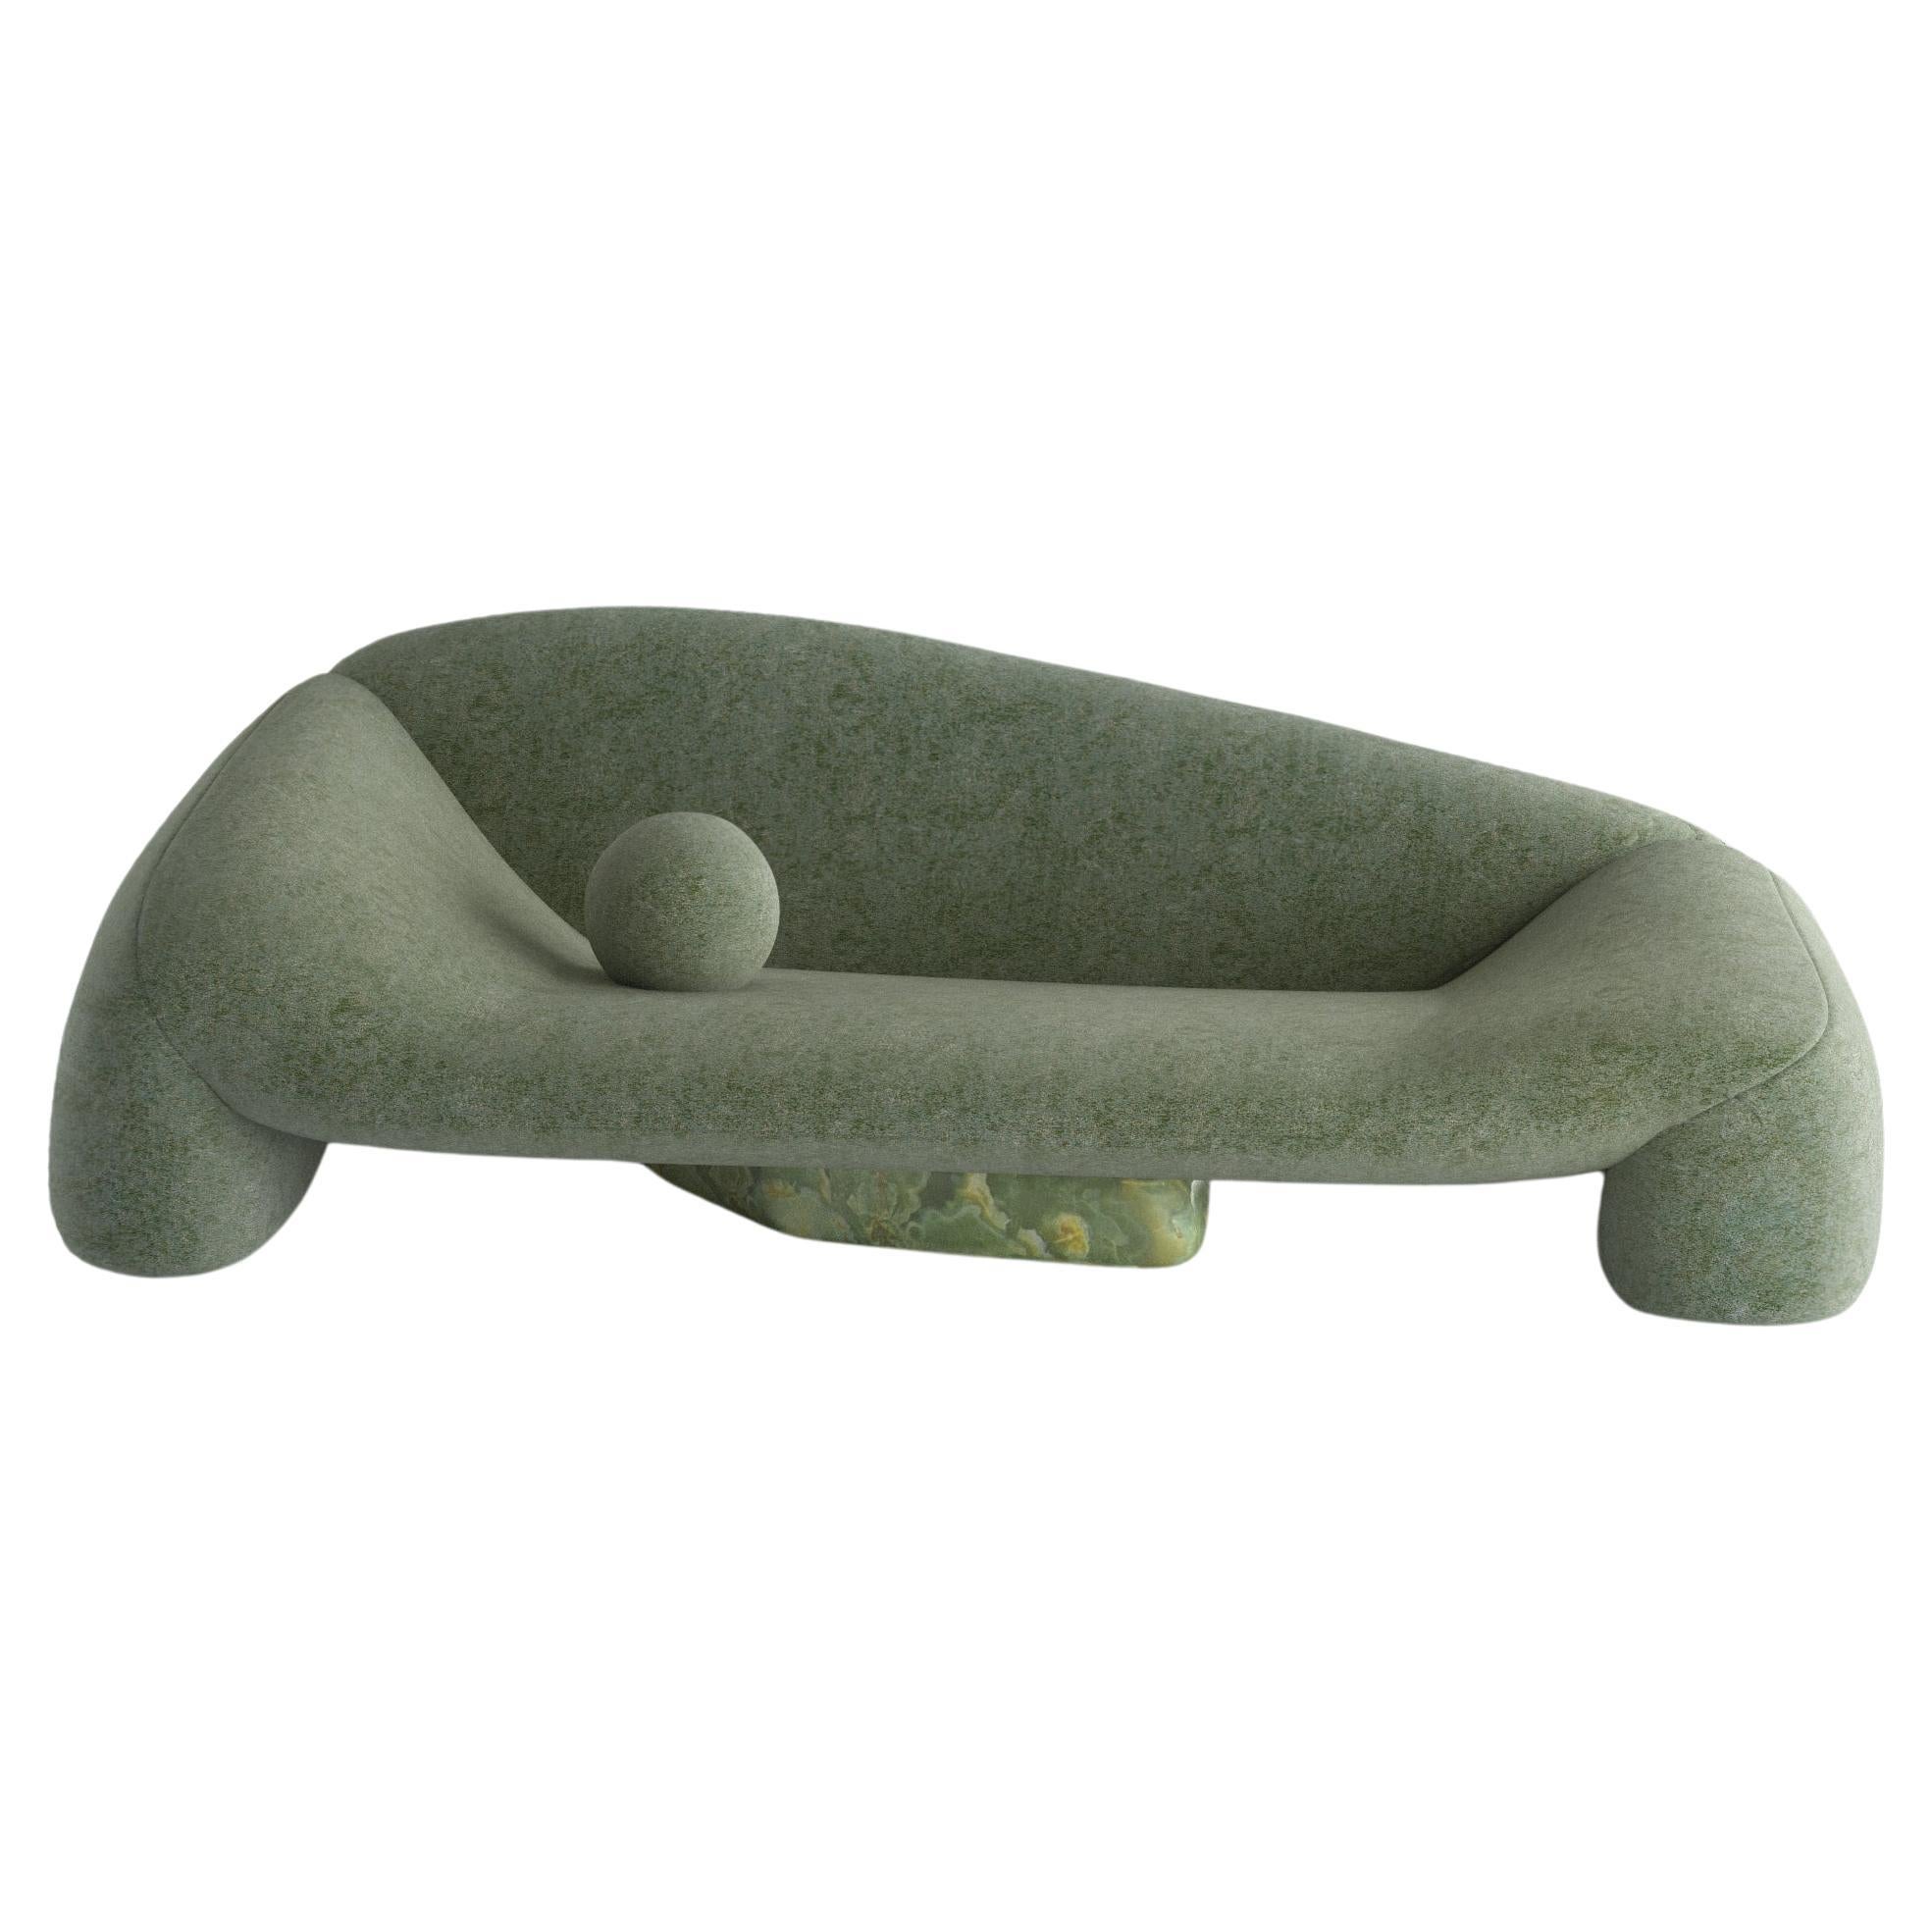 Jell Sofa in Light Green Fabric by Alter Ego Studio